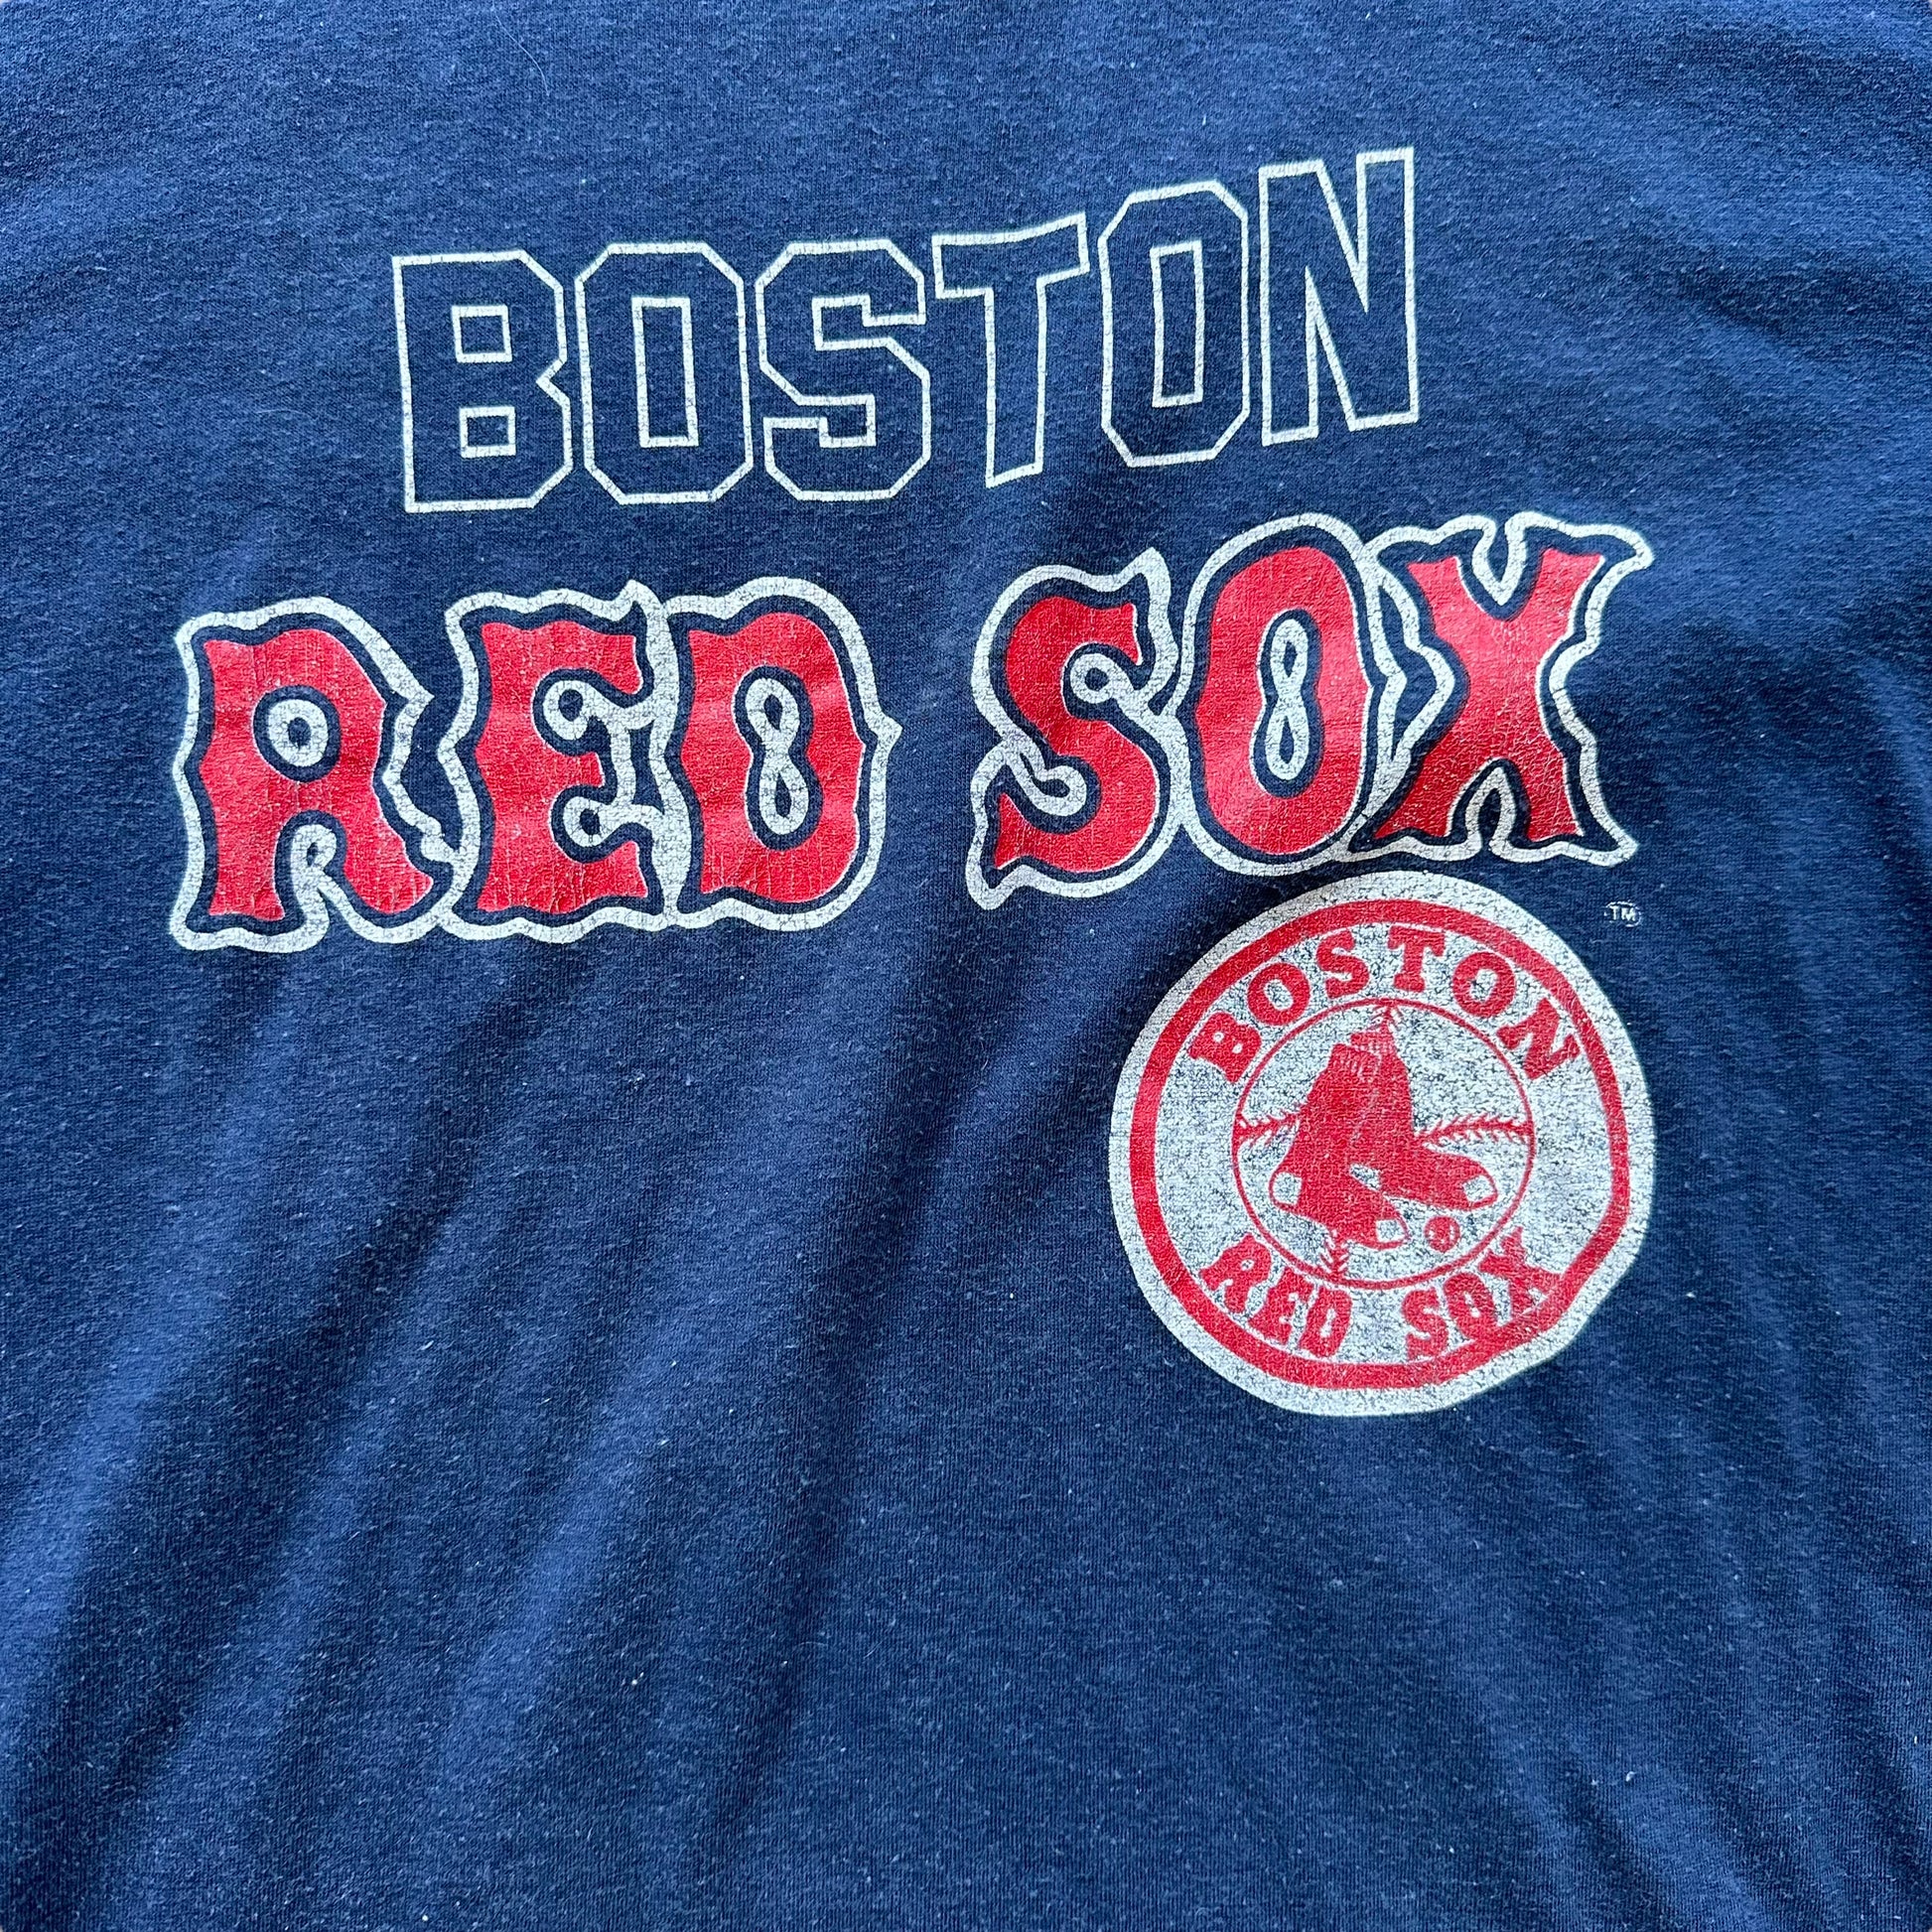 Vintage 1980's Boston Red Sox Tee – Electric West